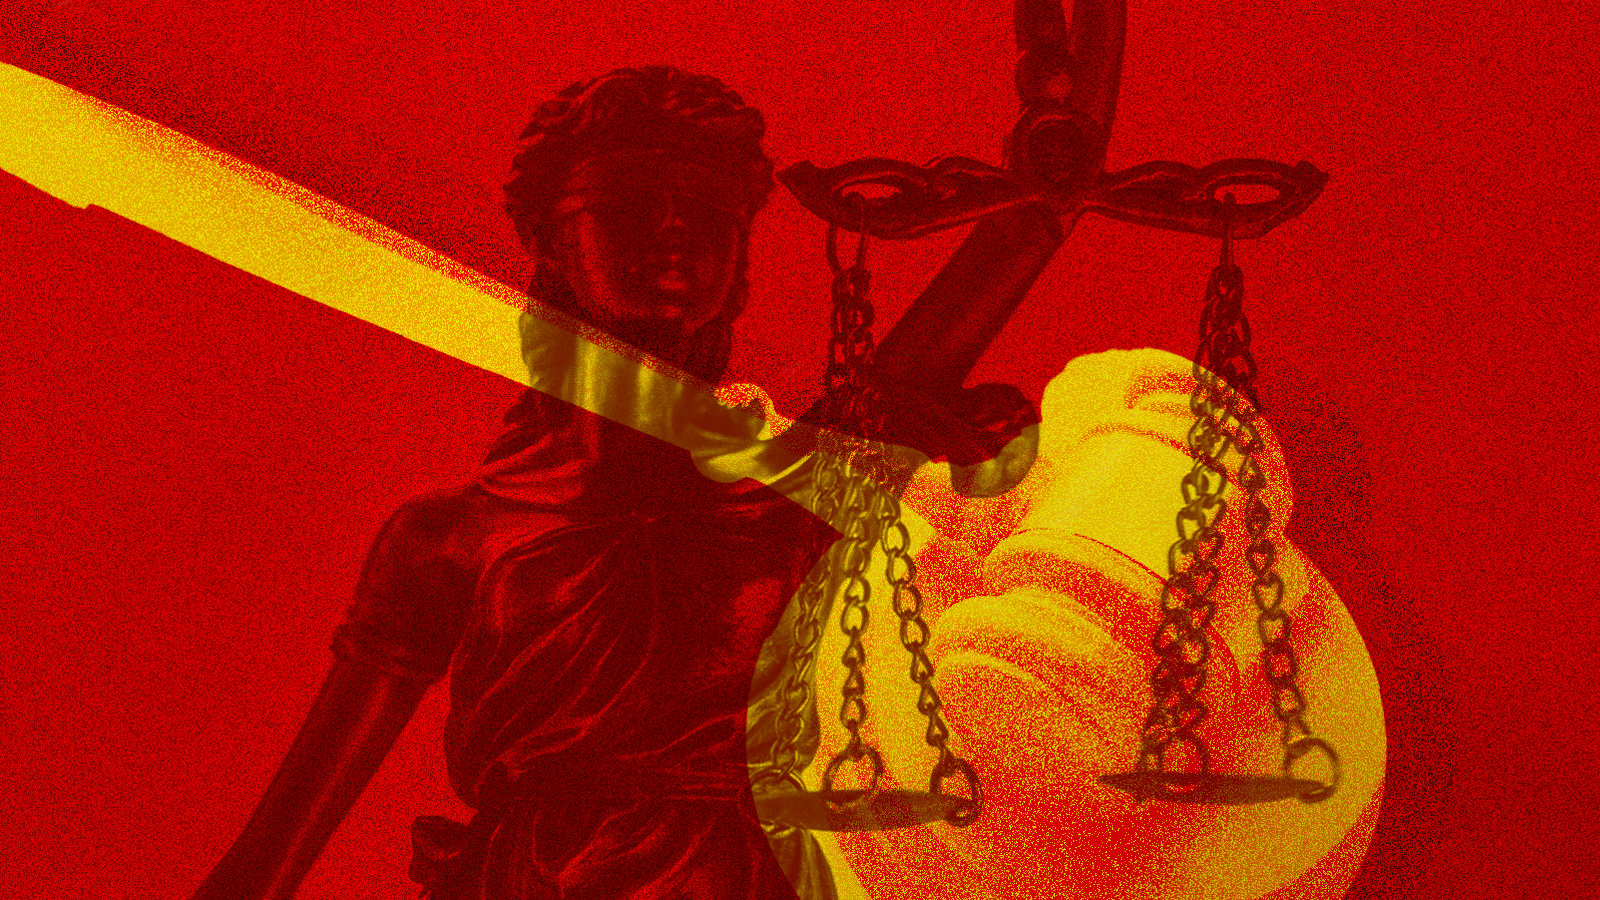 A red and yellow graphic showing a Lady of Justice figure holding two balanced scales with her raised left arm, superimposed over a yellow and orange image of a gavel, all on a red background.